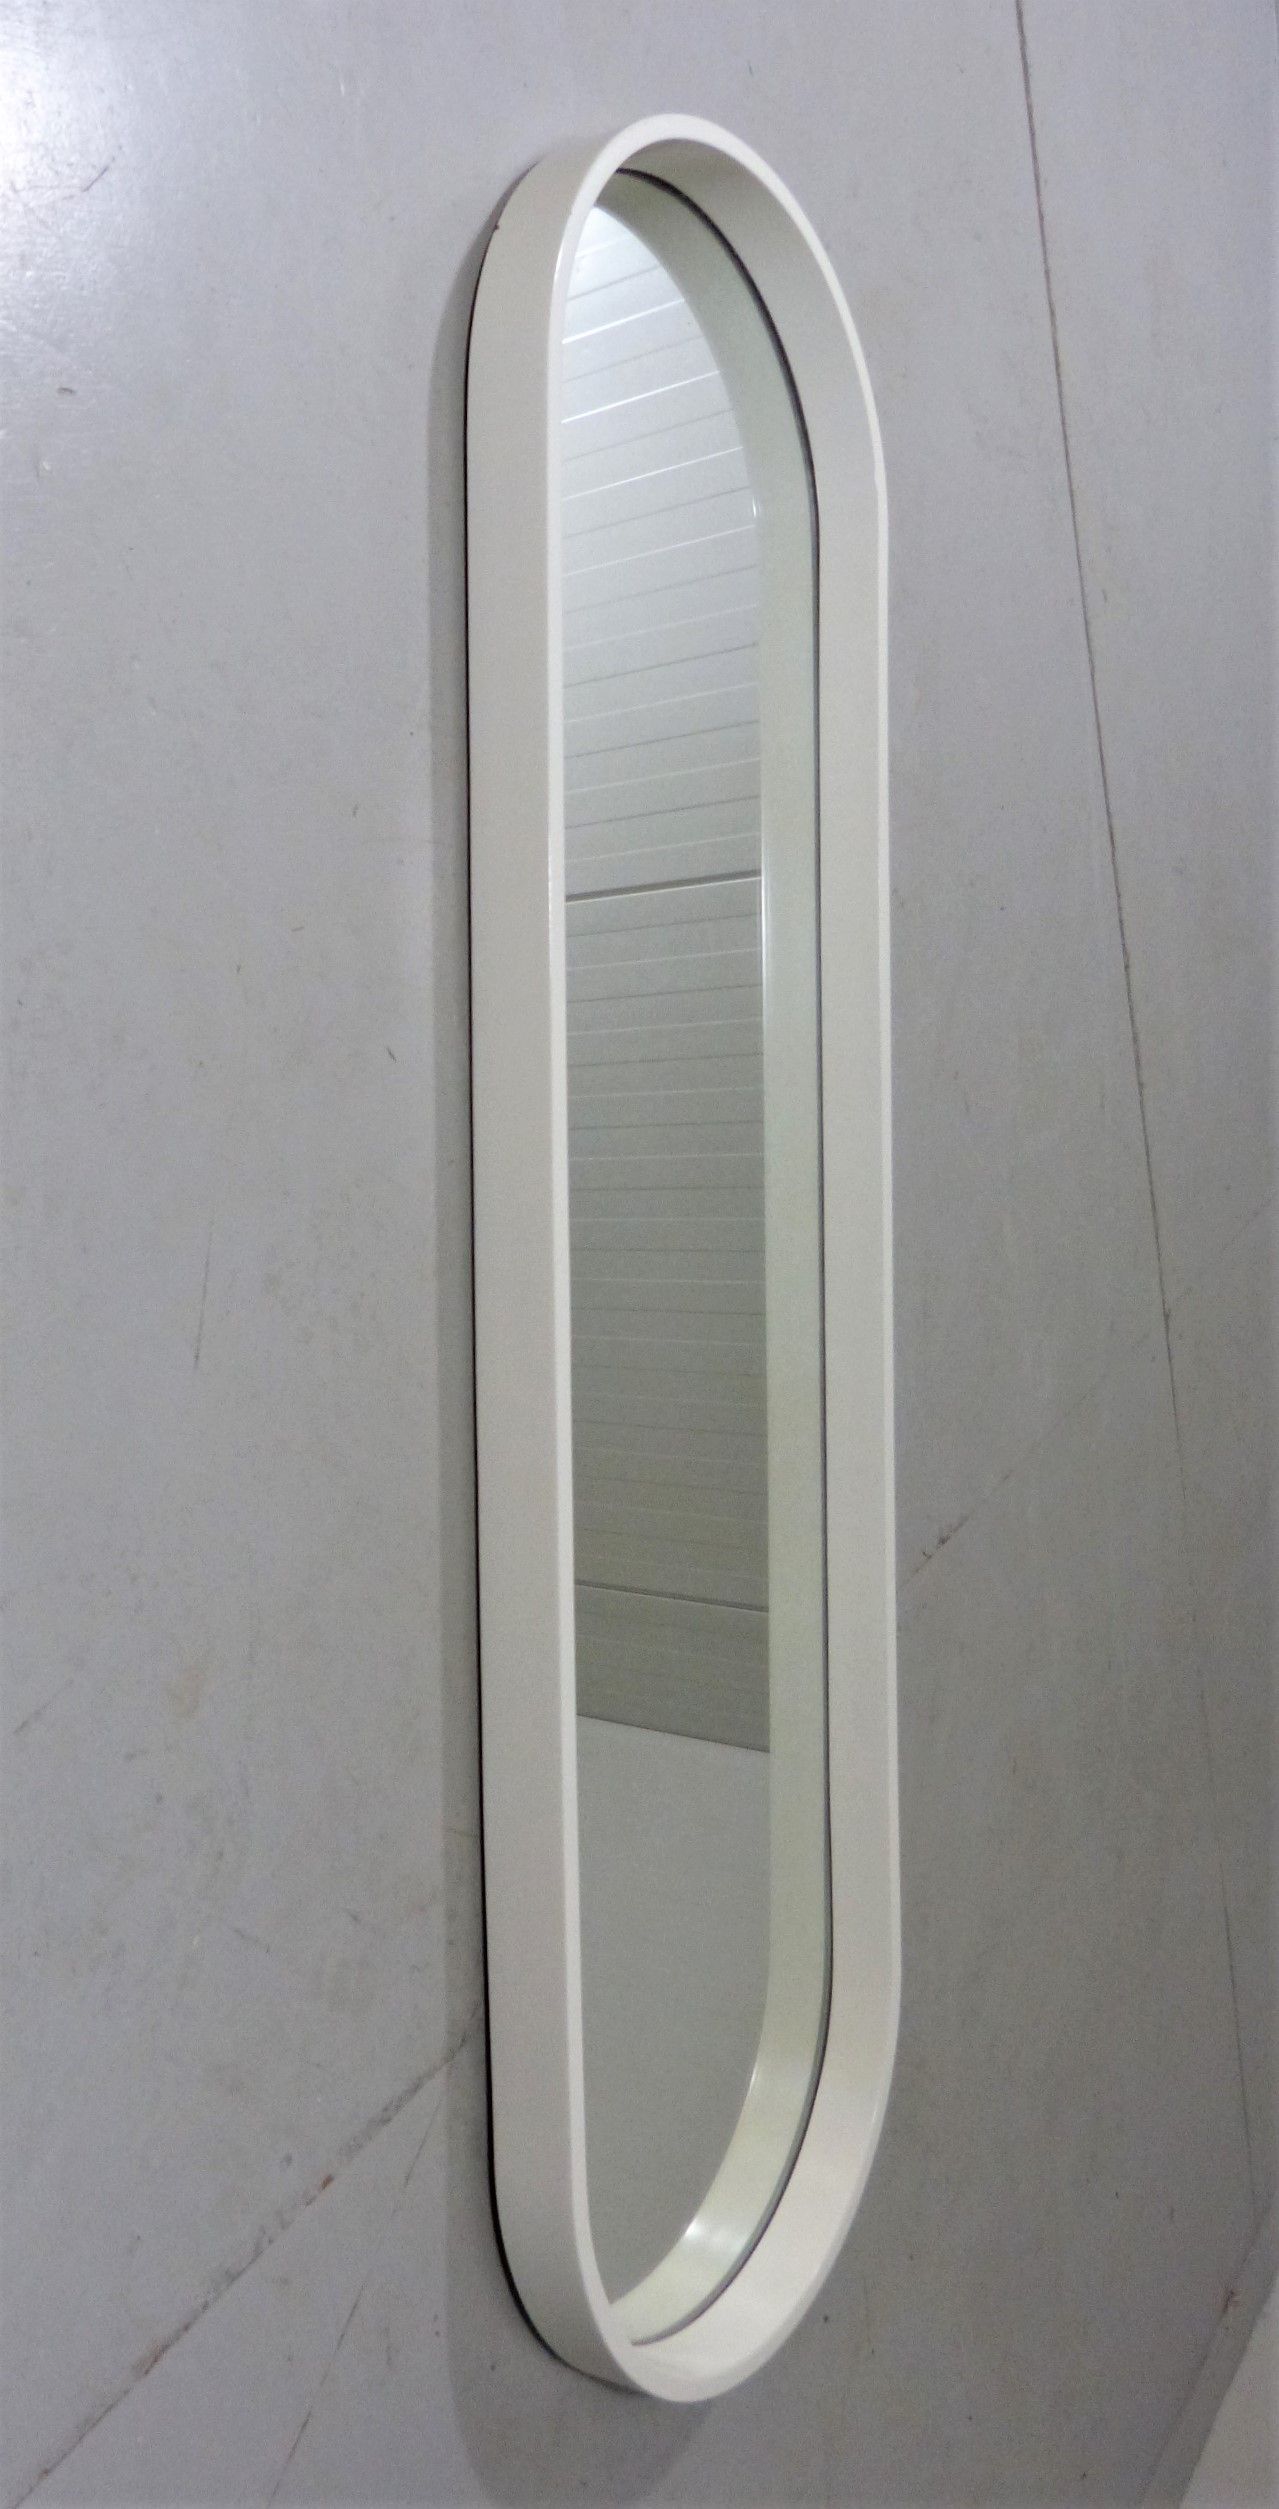 Vintage Oblong Oval Wall Mirror 1960s, Large White Oblong Mirror